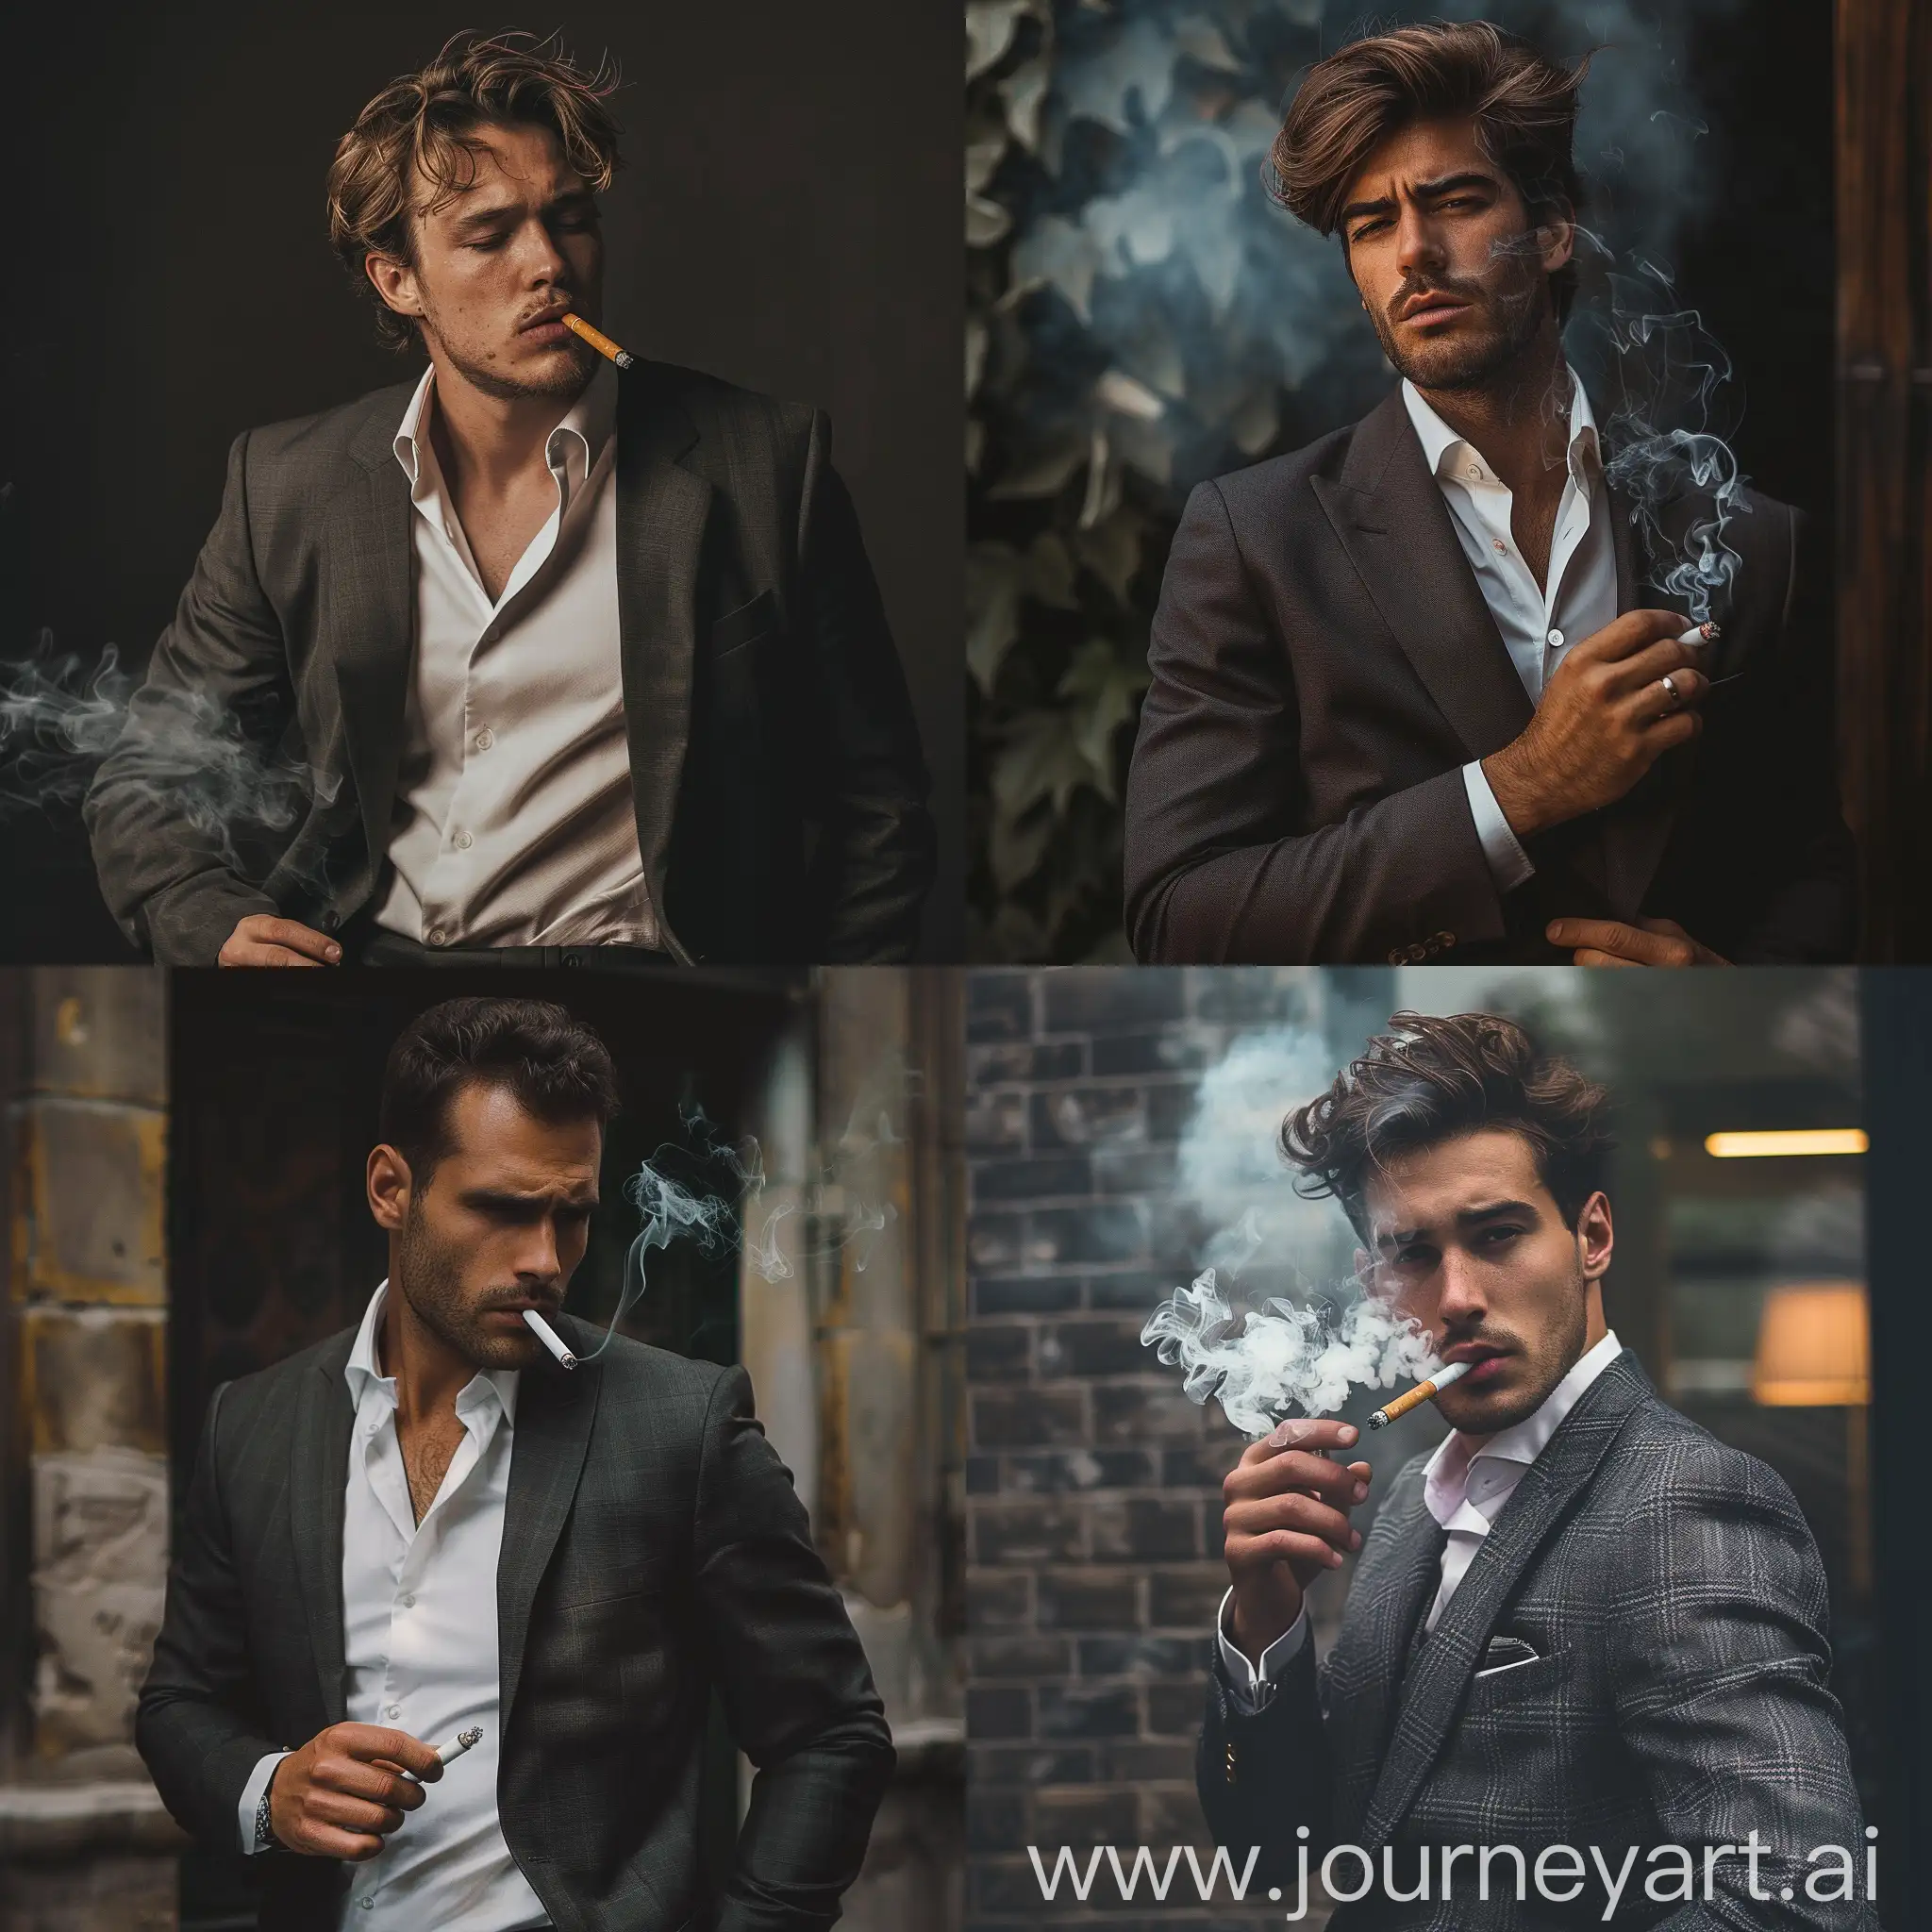 A hot guy that loooks like in his 40s wearing a suit while smoking